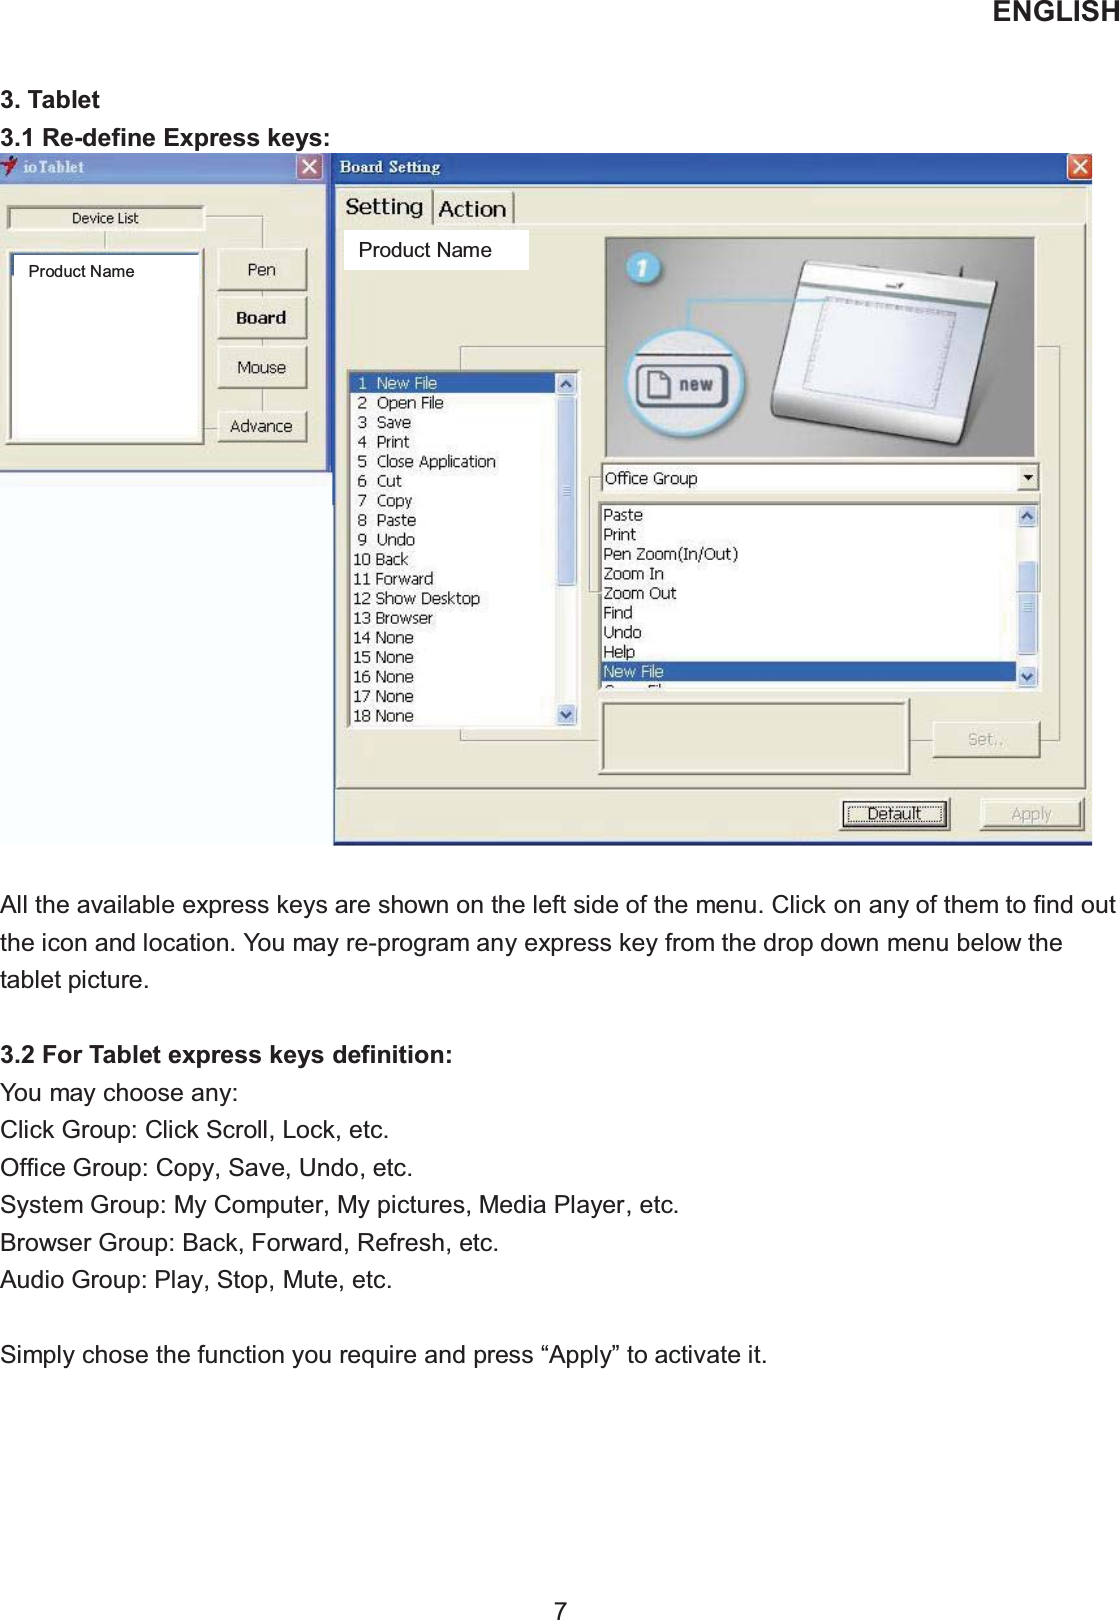 ENGLISH  7   3. Tablet   3.1 Re-define Express keys:   All the available express keys are shown on the left side of the menu. Click on any of them to find out the icon and location. You may re-program any express key from the drop down menu below the tablet picture.  3.2 For Tablet express keys definition: You may choose any: Click Group: Click Scroll, Lock, etc. Office Group: Copy, Save, Undo, etc. System Group: My Computer, My pictures, Media Player, etc. Browser Group: Back, Forward, Refresh, etc. Audio Group: Play, Stop, Mute, etc.  Simply chose the function you require and press “Apply” to activate it. Product Name Product Name 